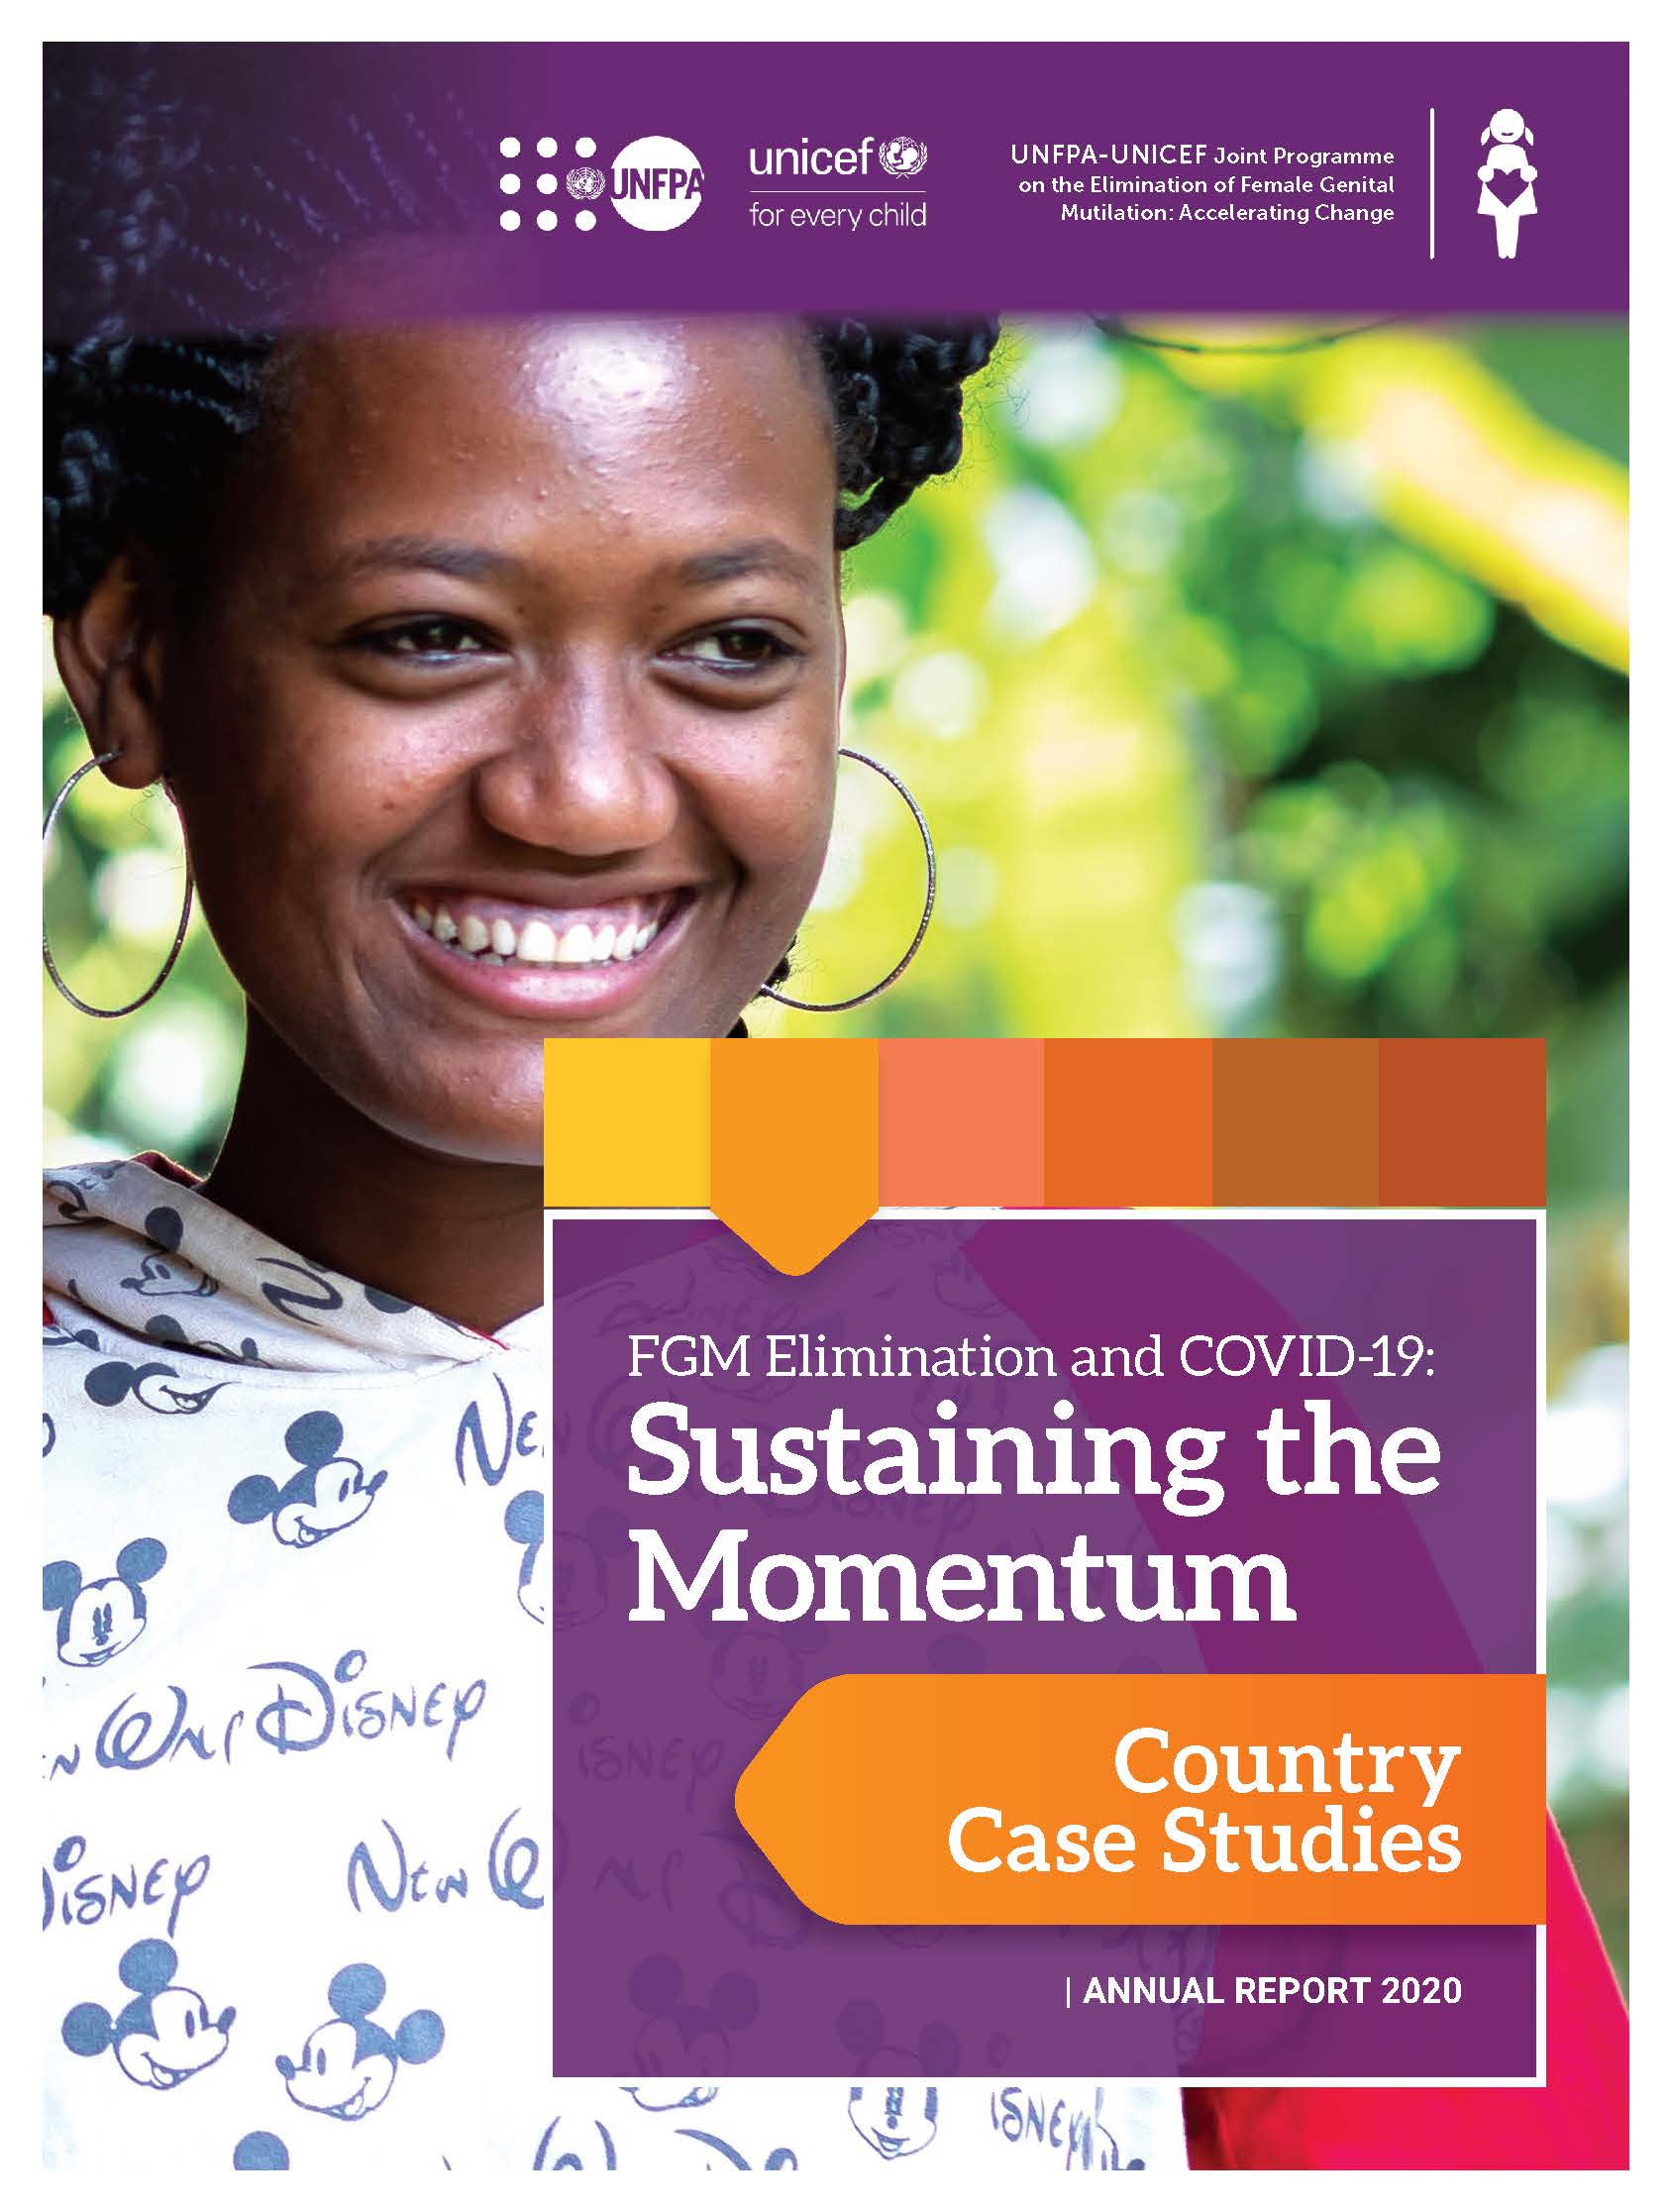 2020 Annual Report on FGM: Country Case Studies - Progress in the Elimination…